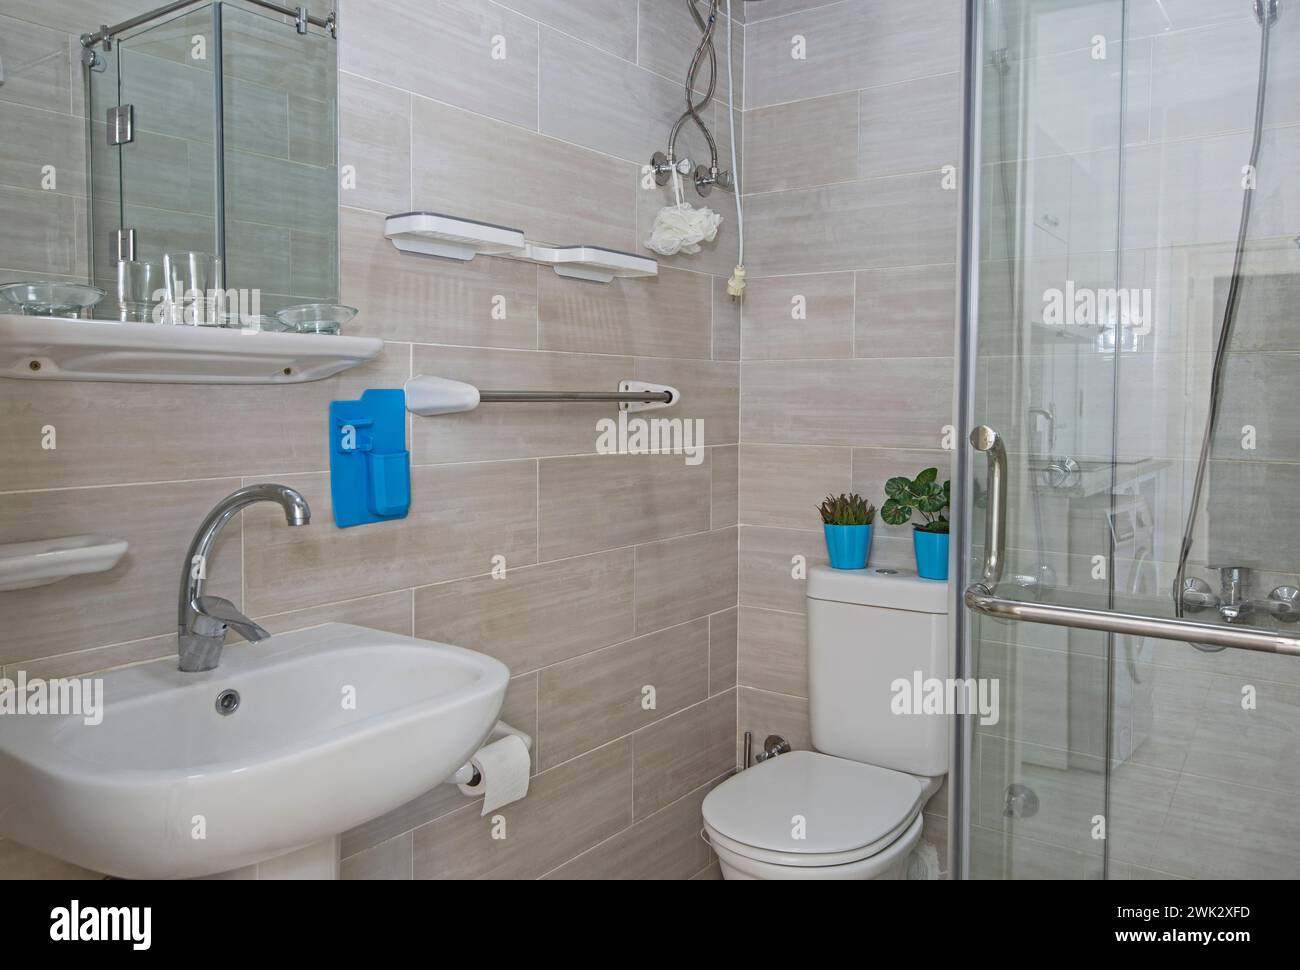 Interior design of a luxury show home apartment bathroom with shower cubicle and sink Stock Photo